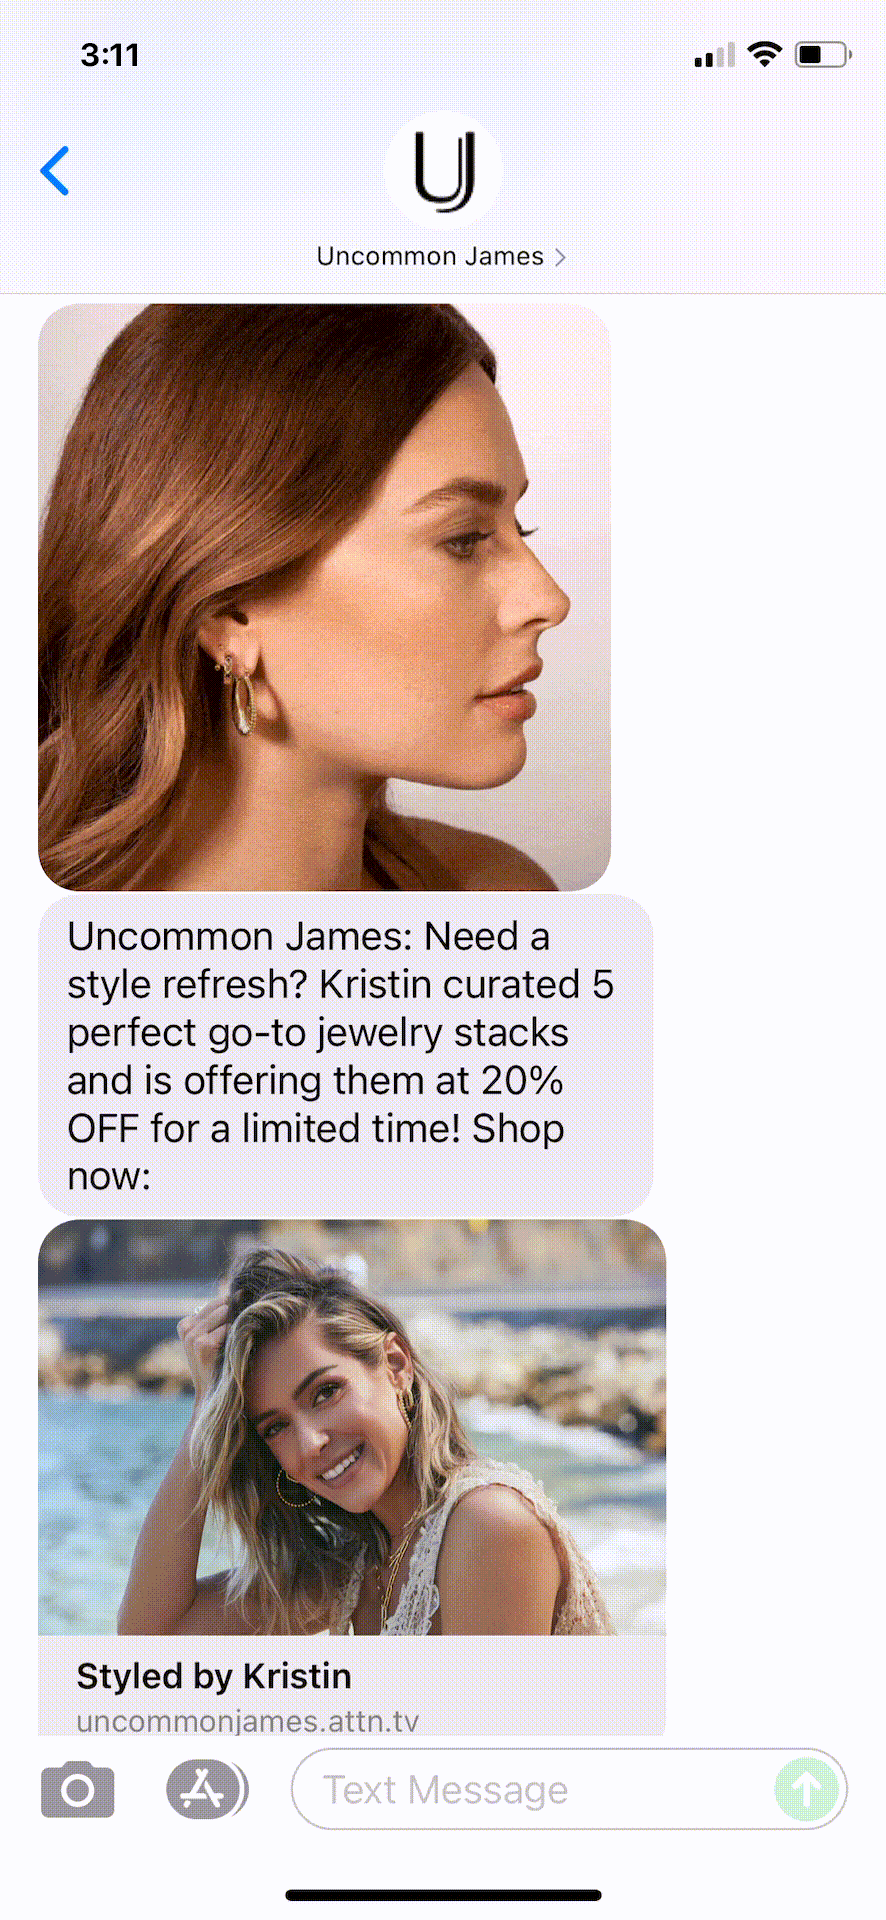 Uncommon-James-Text-Message-Marketing-Example-06.20.2021